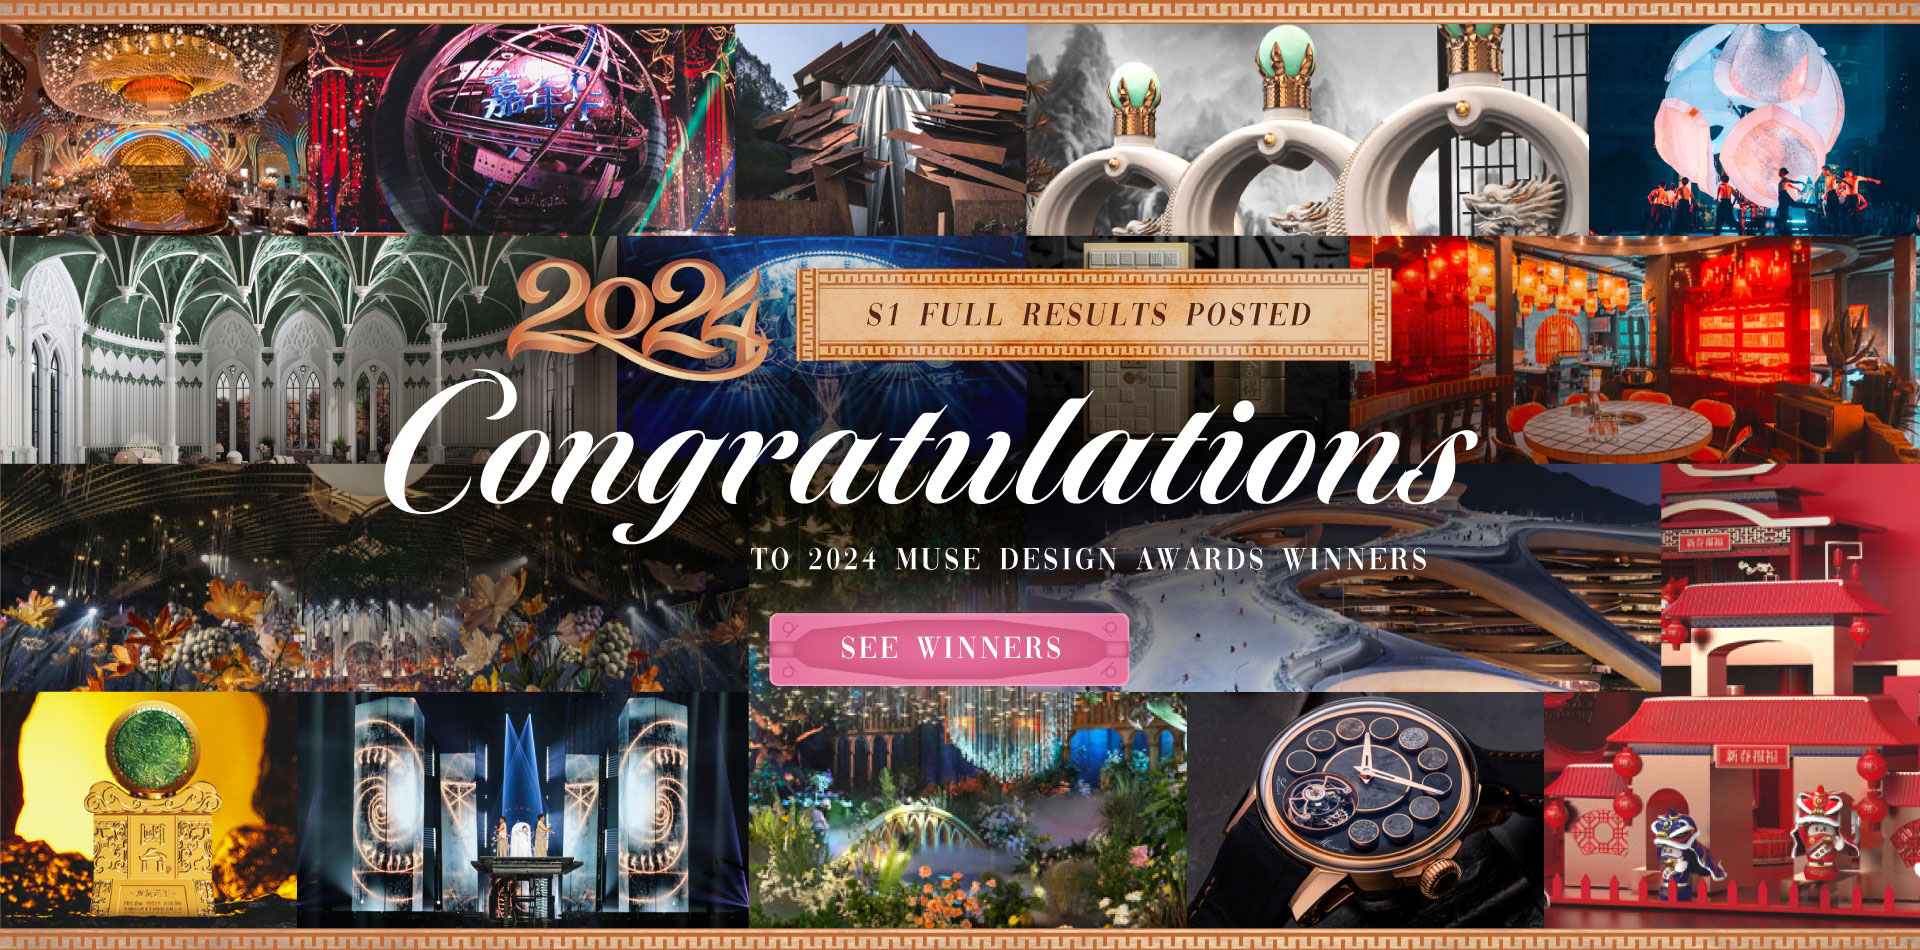 2024 MUSE Design Awards S1 Full Results Announced!